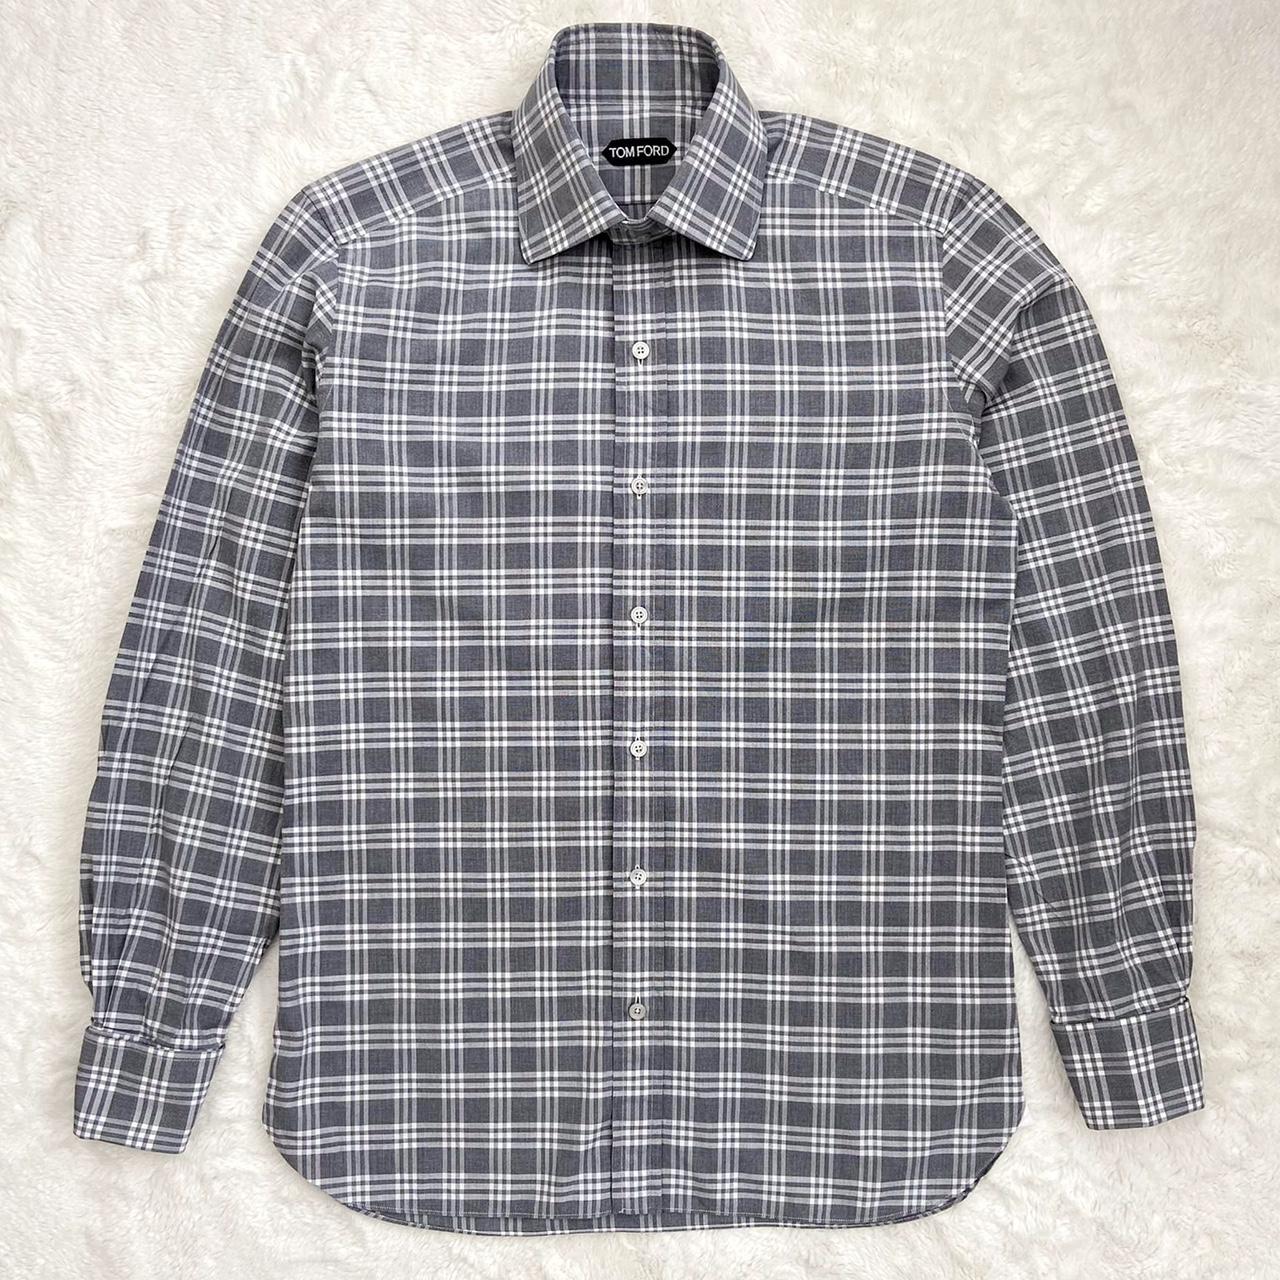 Tom Ford Sartorial Checked Long Sleeve Shirt in... - Depop